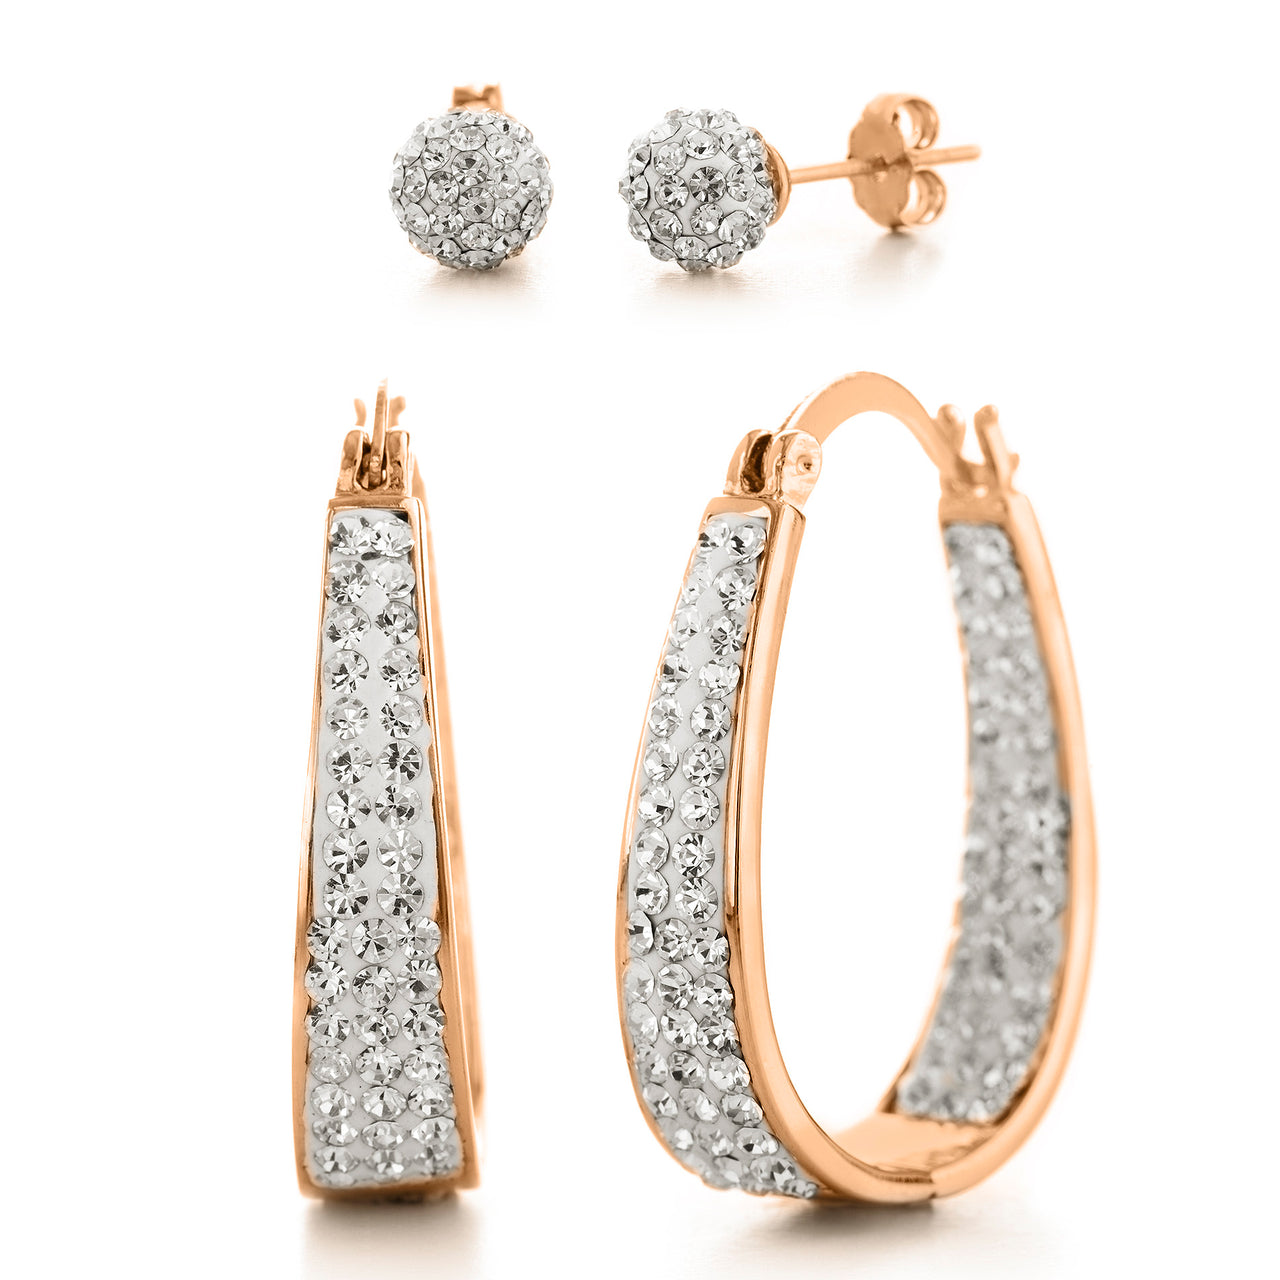 Lesa Michele Rose Gold Plated Crystal Hoop and Ball Stud Earring set in Brass